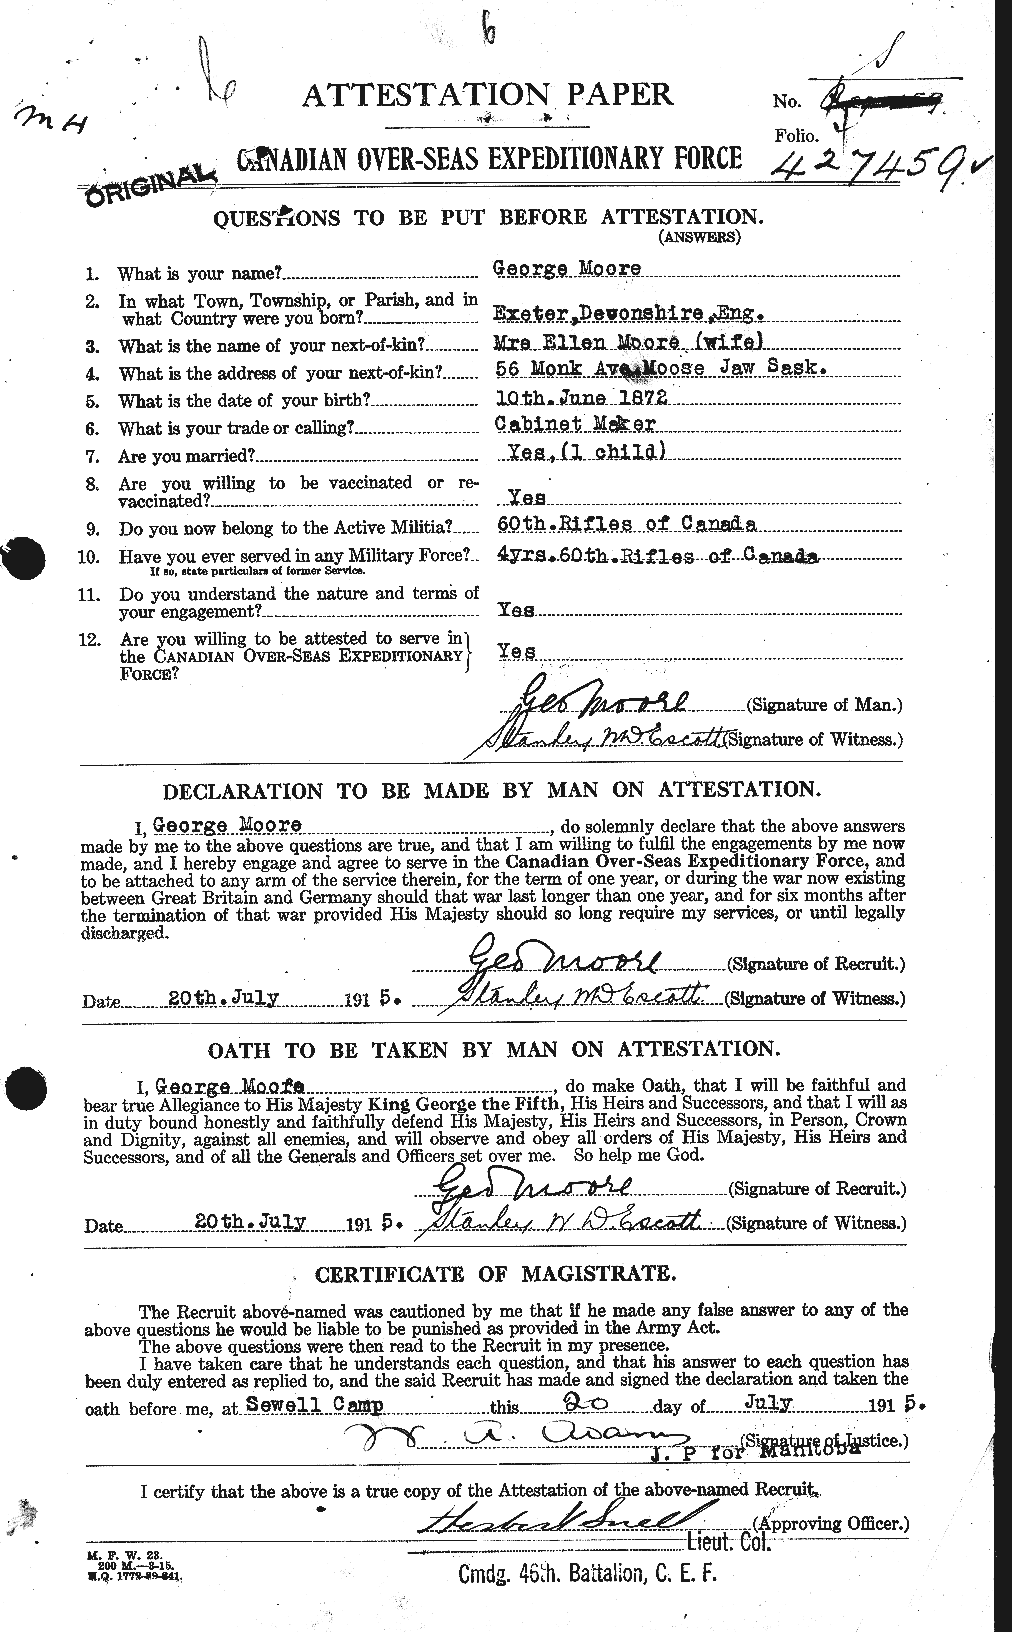 Personnel Records of the First World War - CEF 501969a